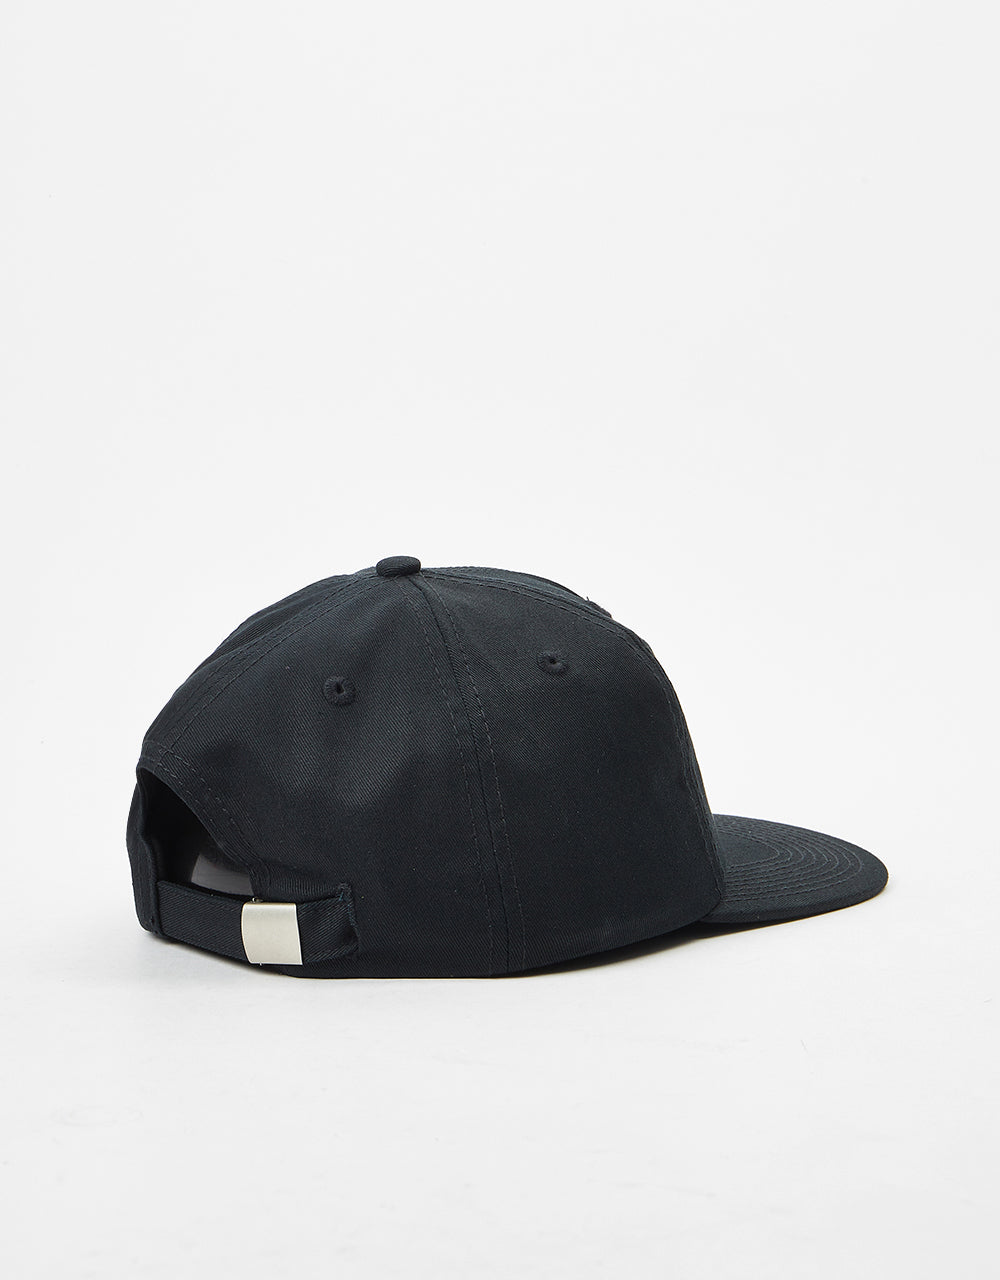 Route One 6 Panel (Unstructured) Cap - Black